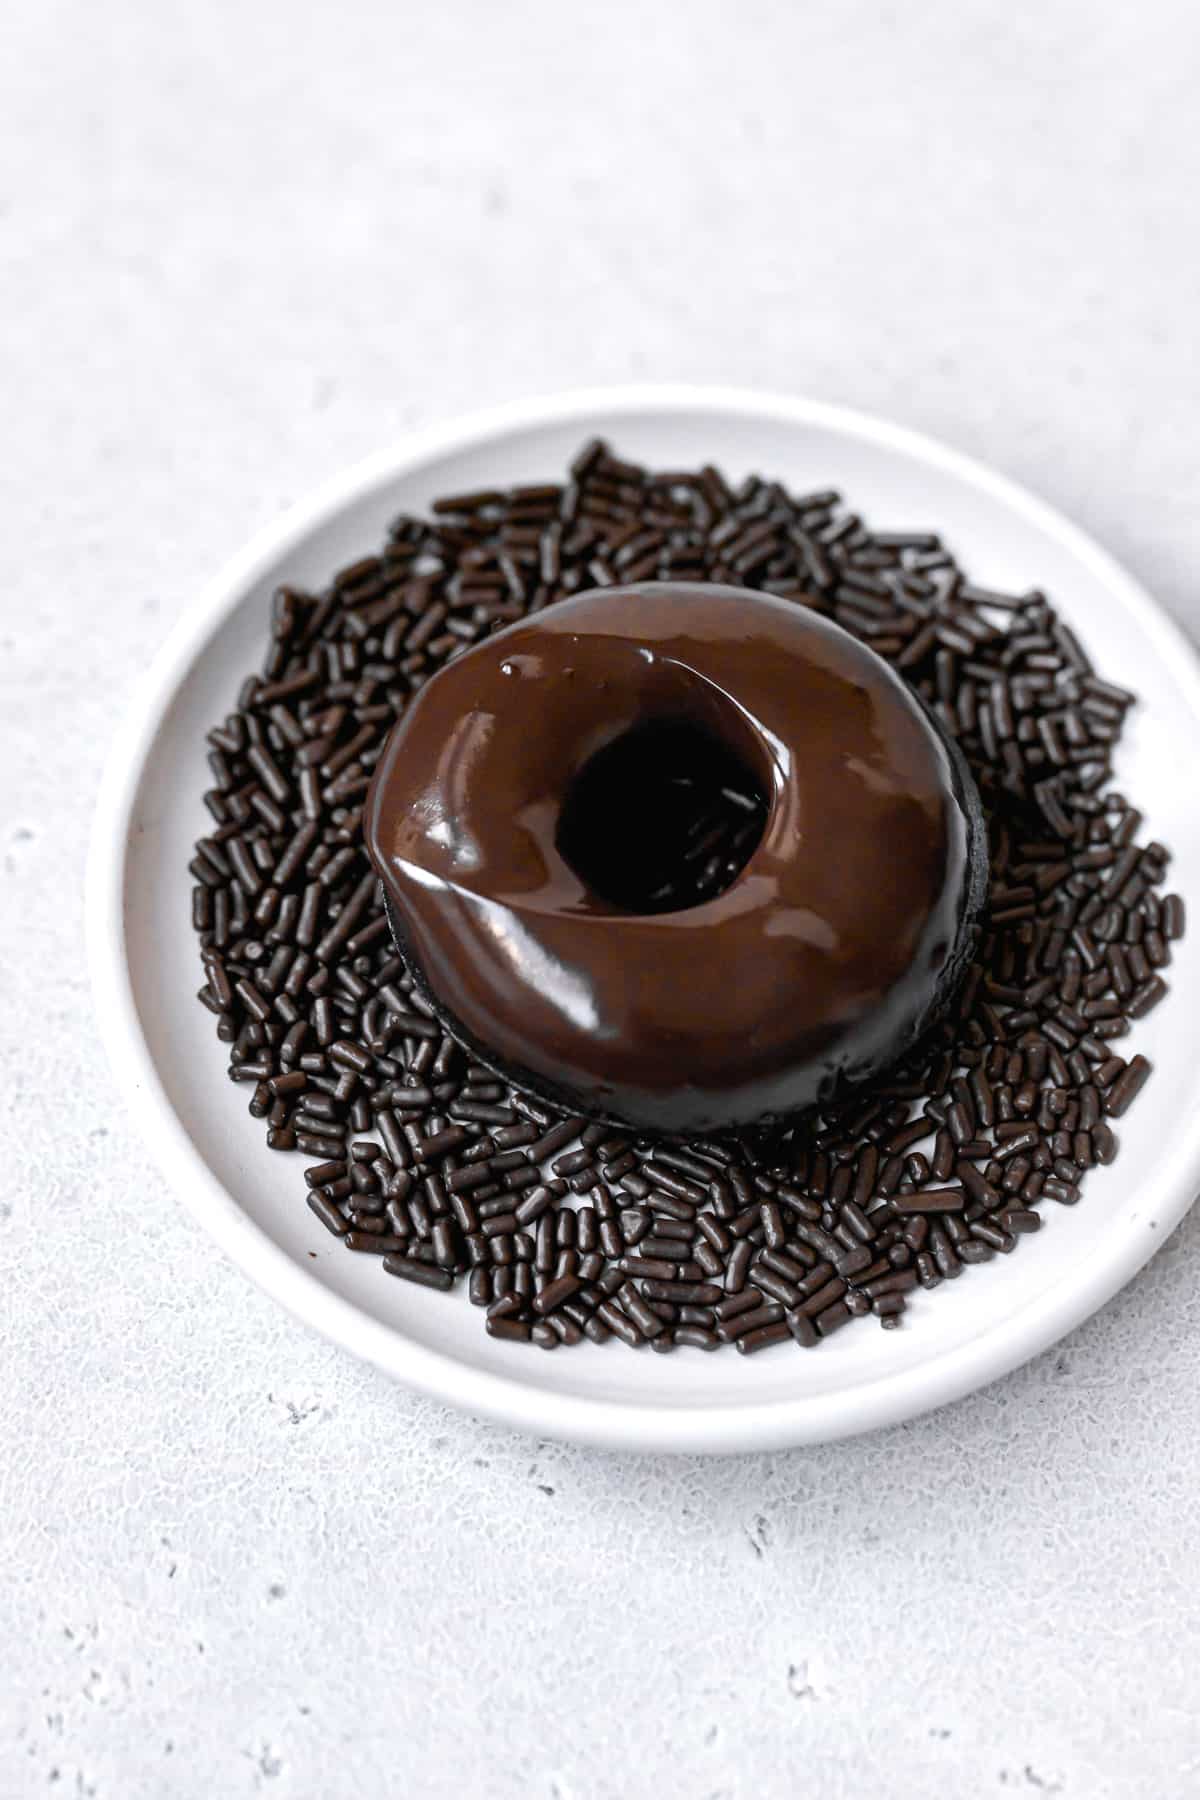 chocolate donut dipped in glaze and sitting on a white plate full of sprinkles.